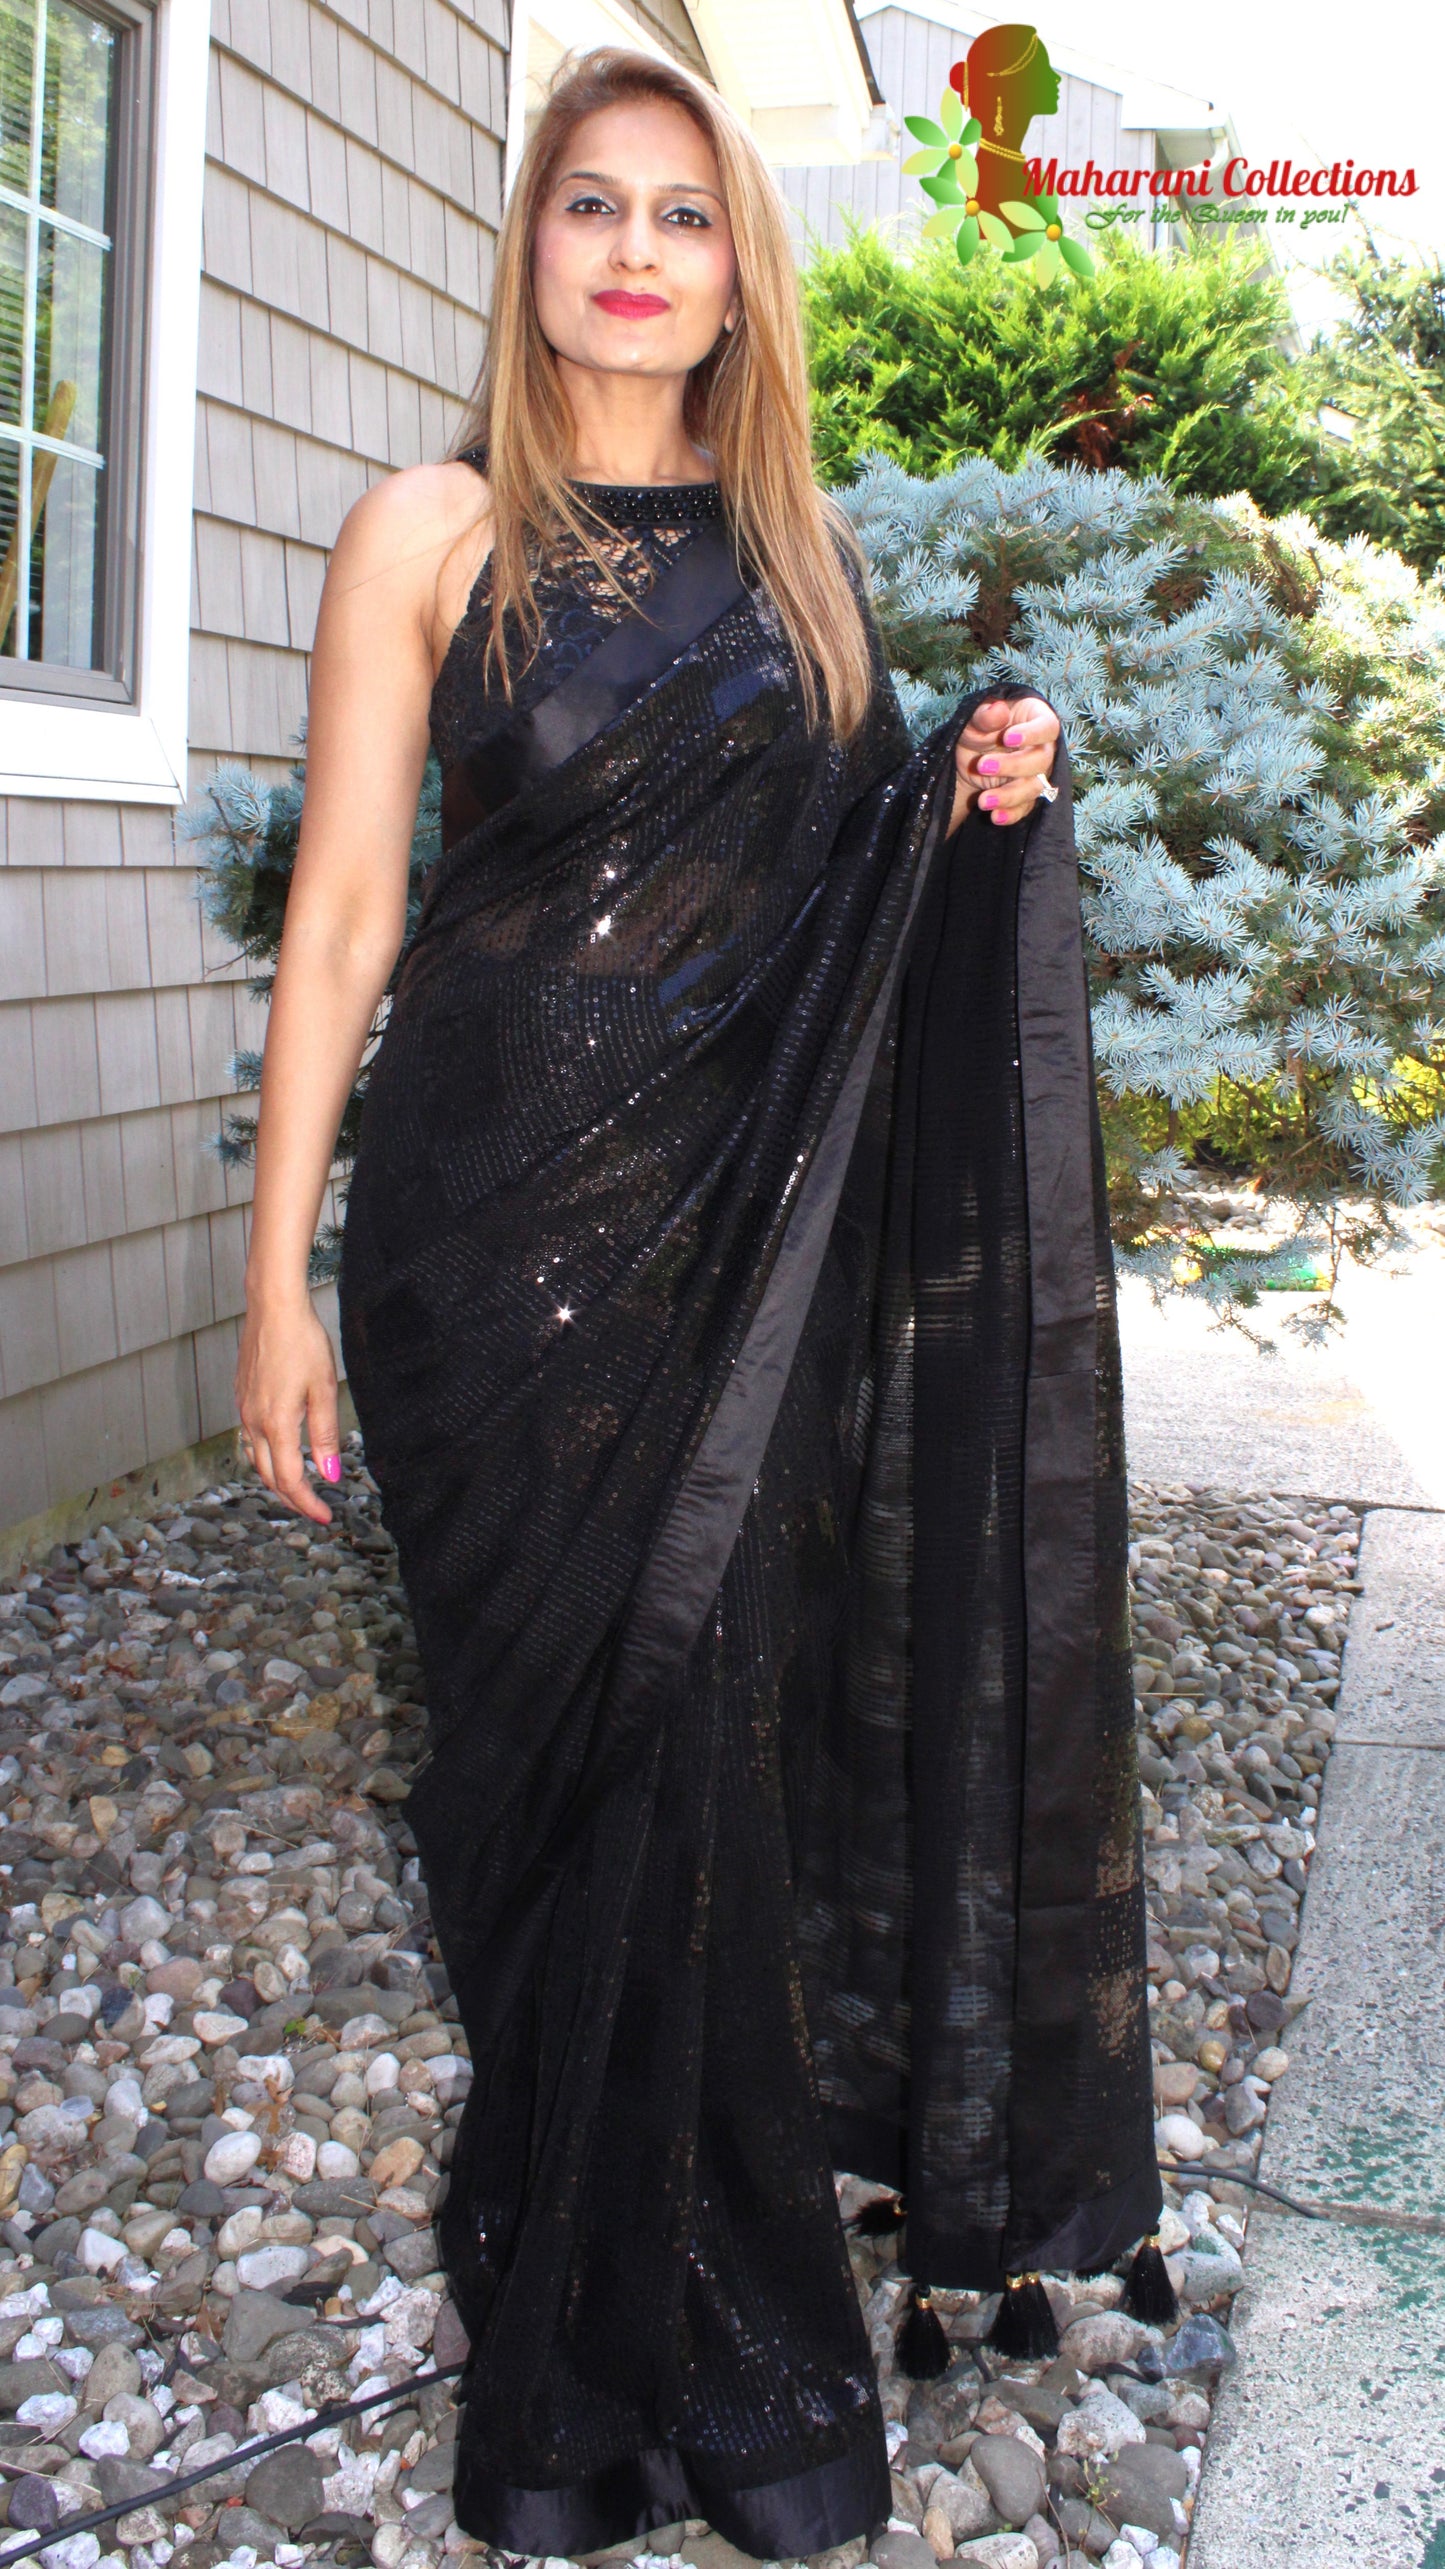 Maharani's Party Wear Georgette Sequins Saree - Black (with Stitched Blouse and Petticoat)